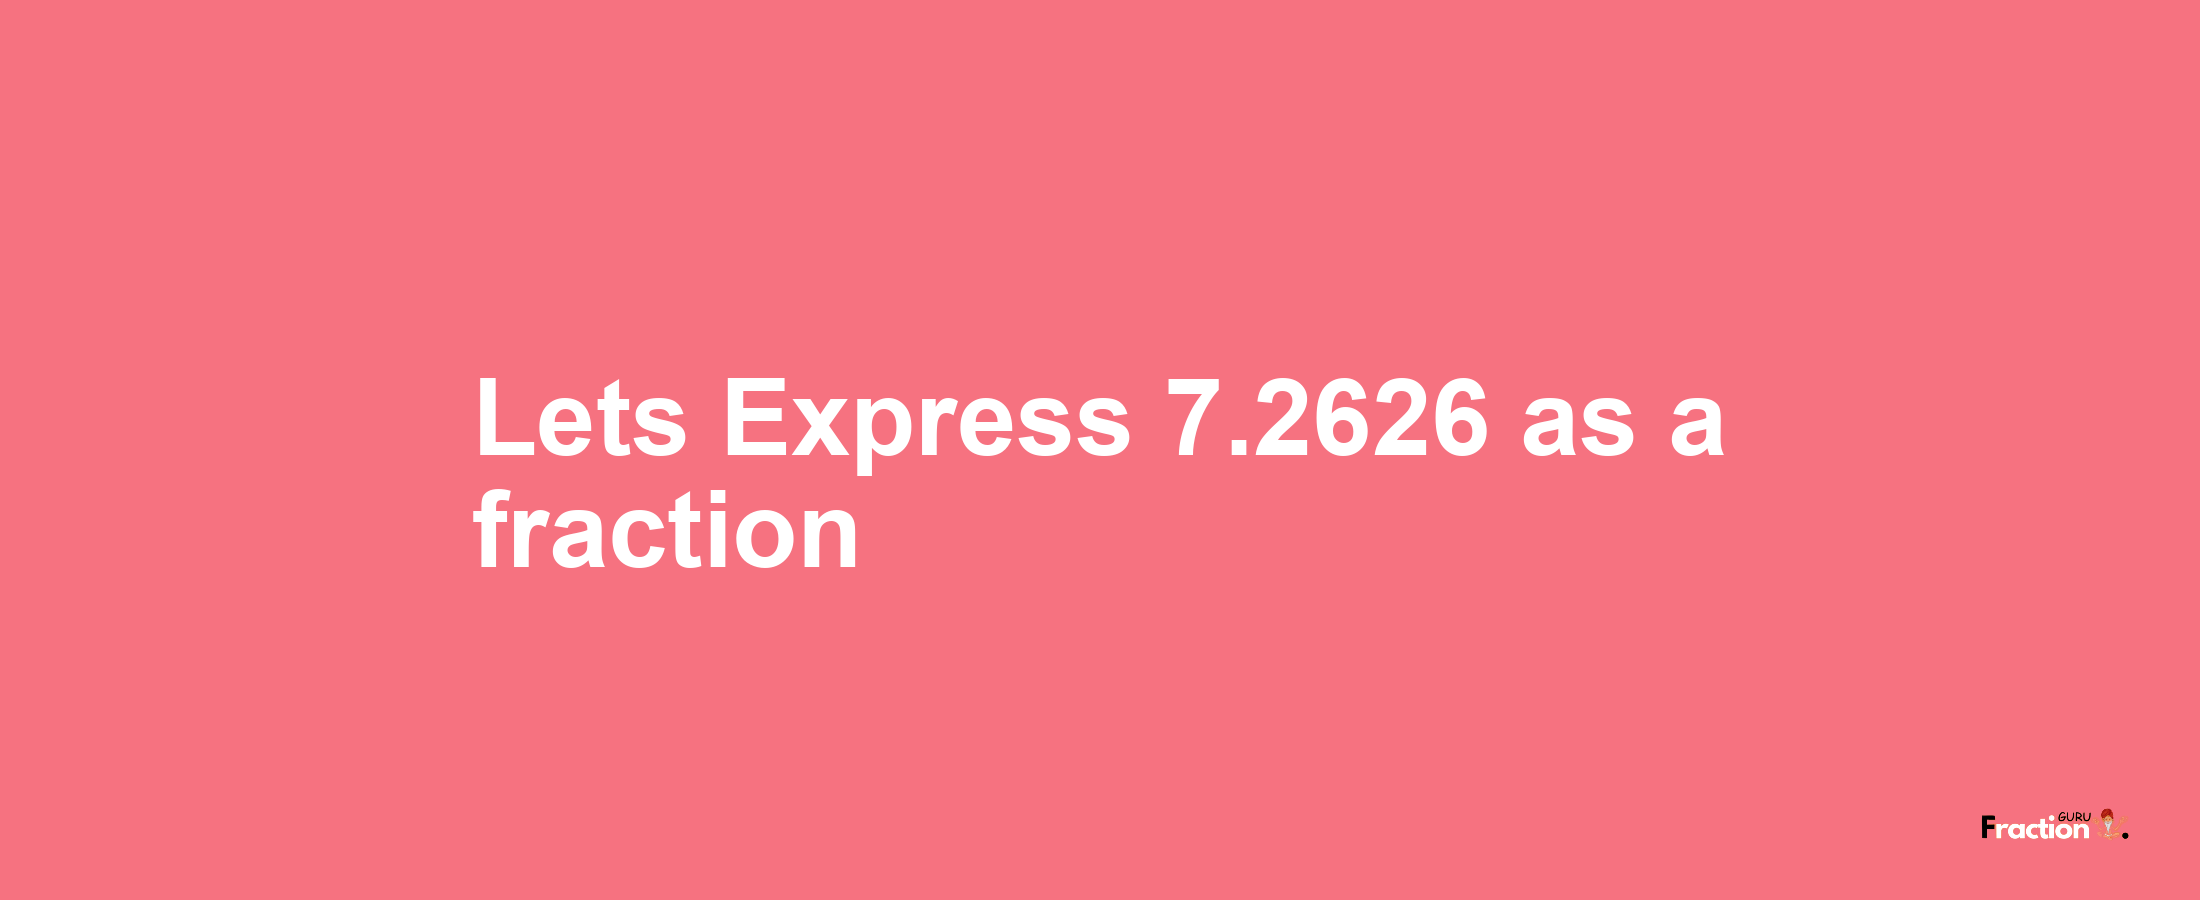 Lets Express 7.2626 as afraction